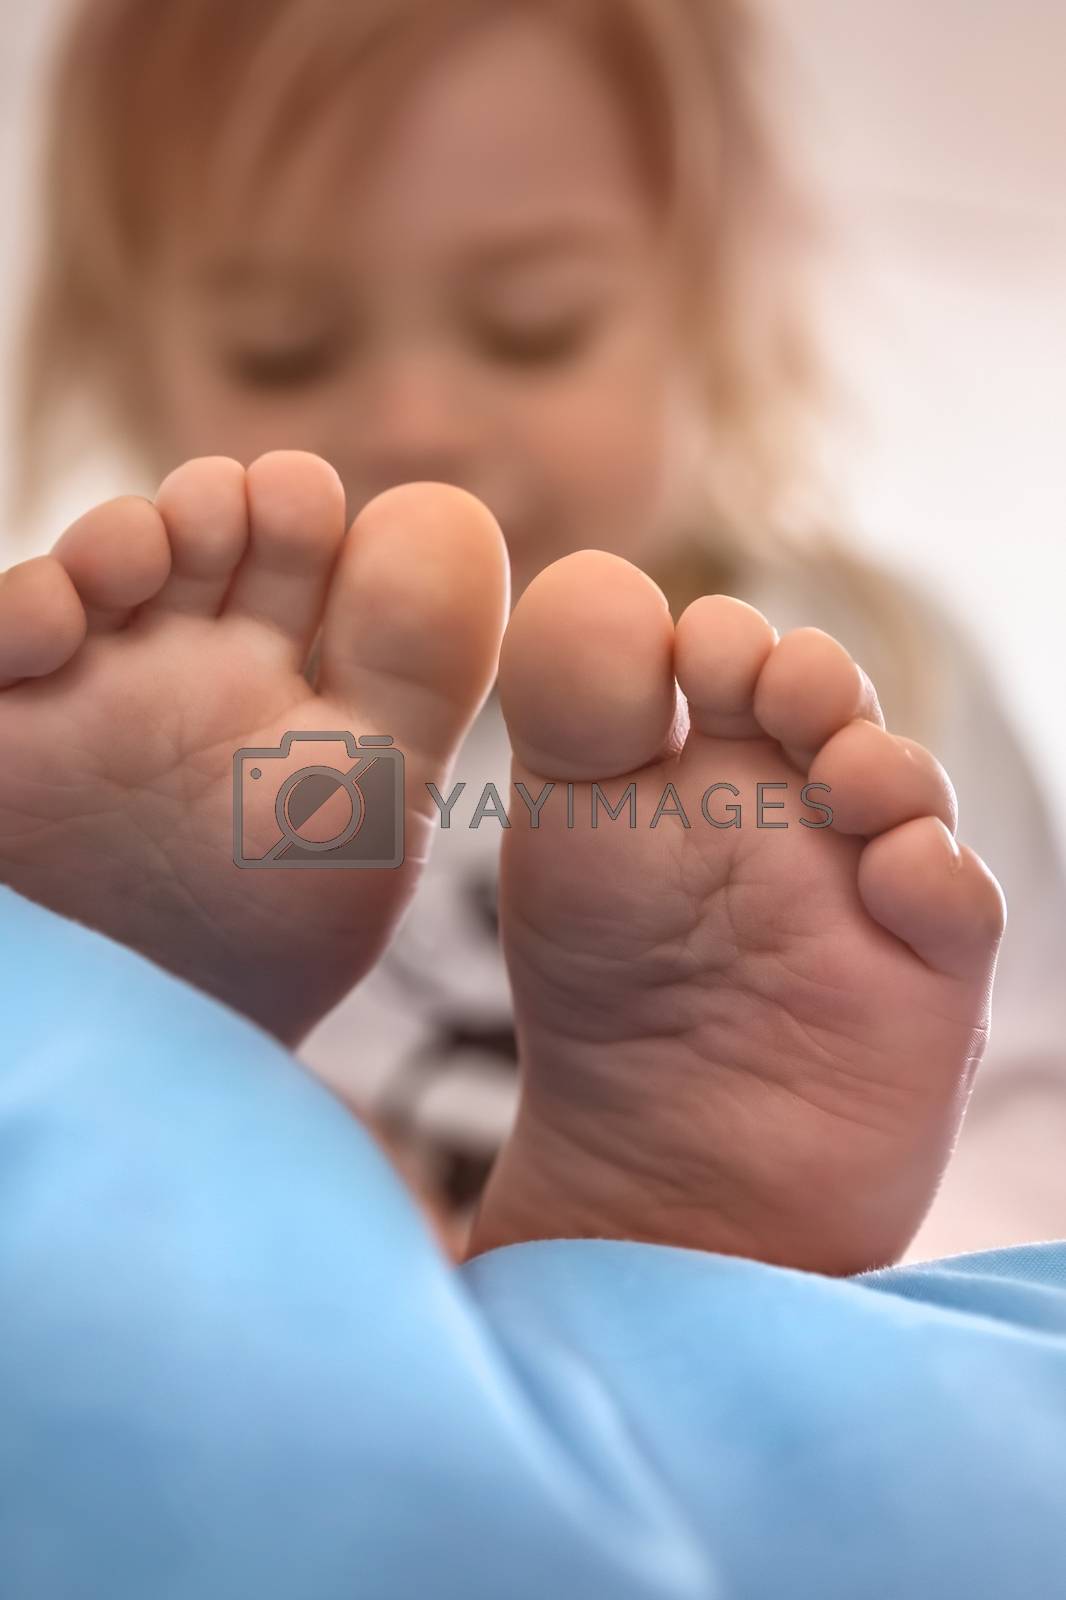 Photo of a Toddlers Feet. Baby after Waking up. Peaceful time at home.